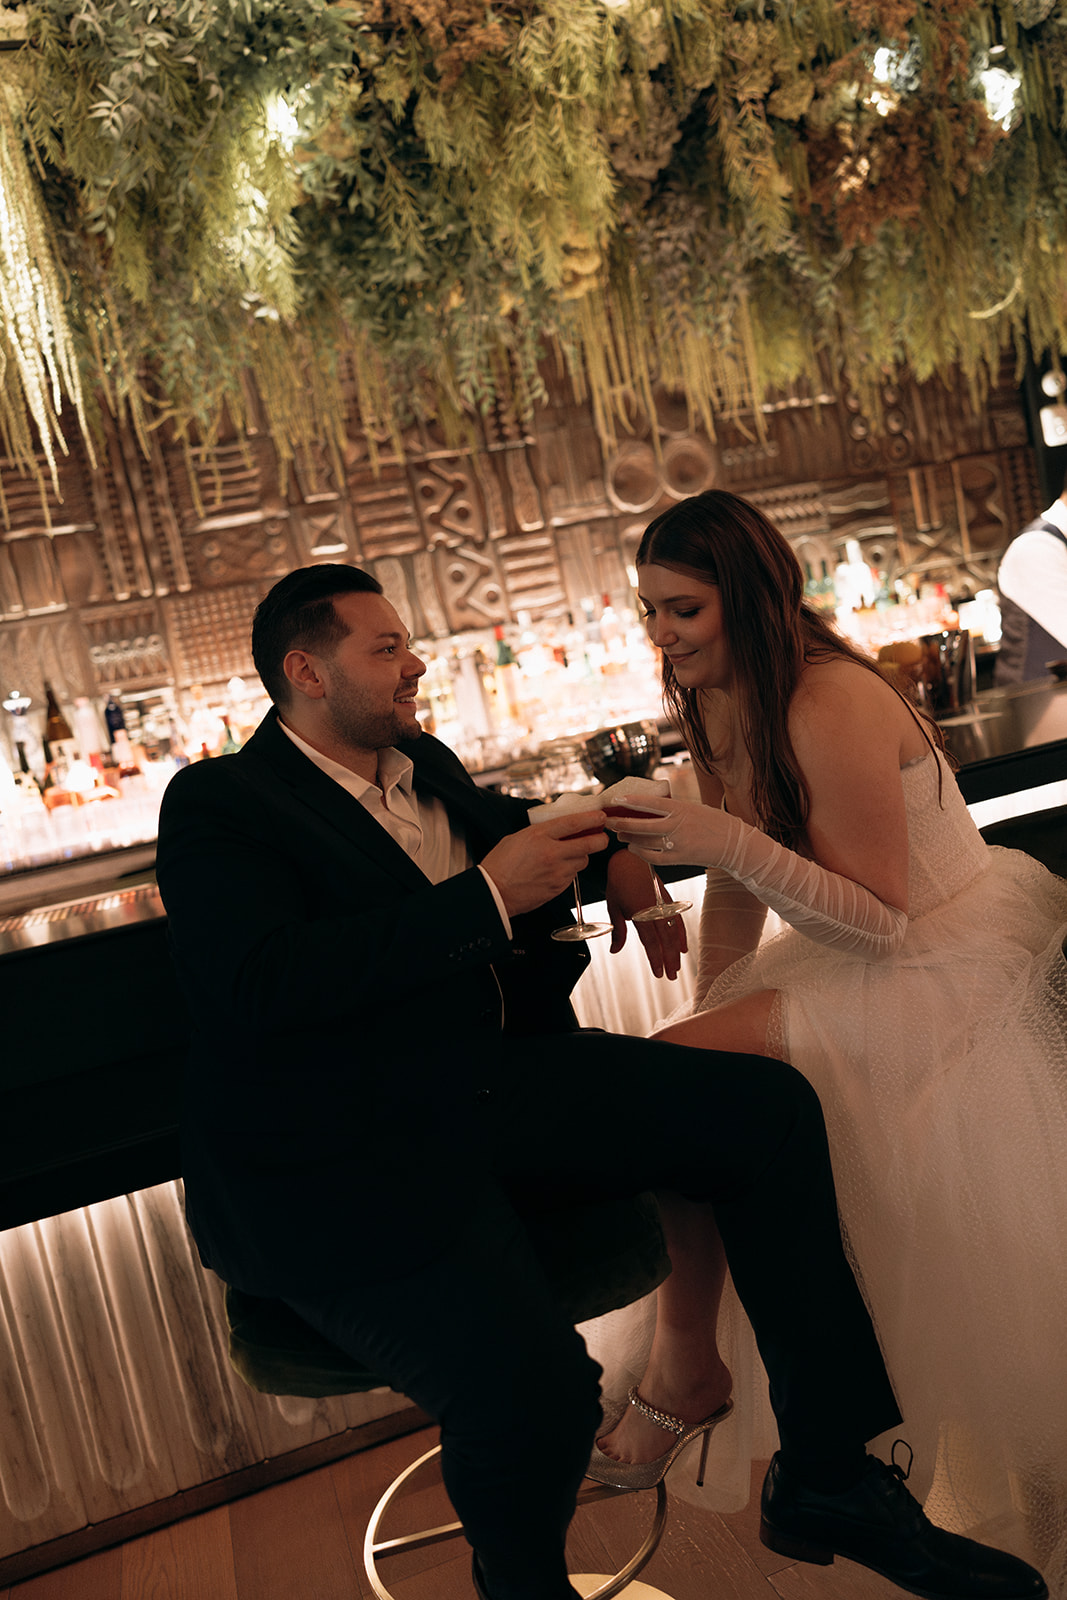 A couple who eloped in NYC go to a bar to share celebratory drinks